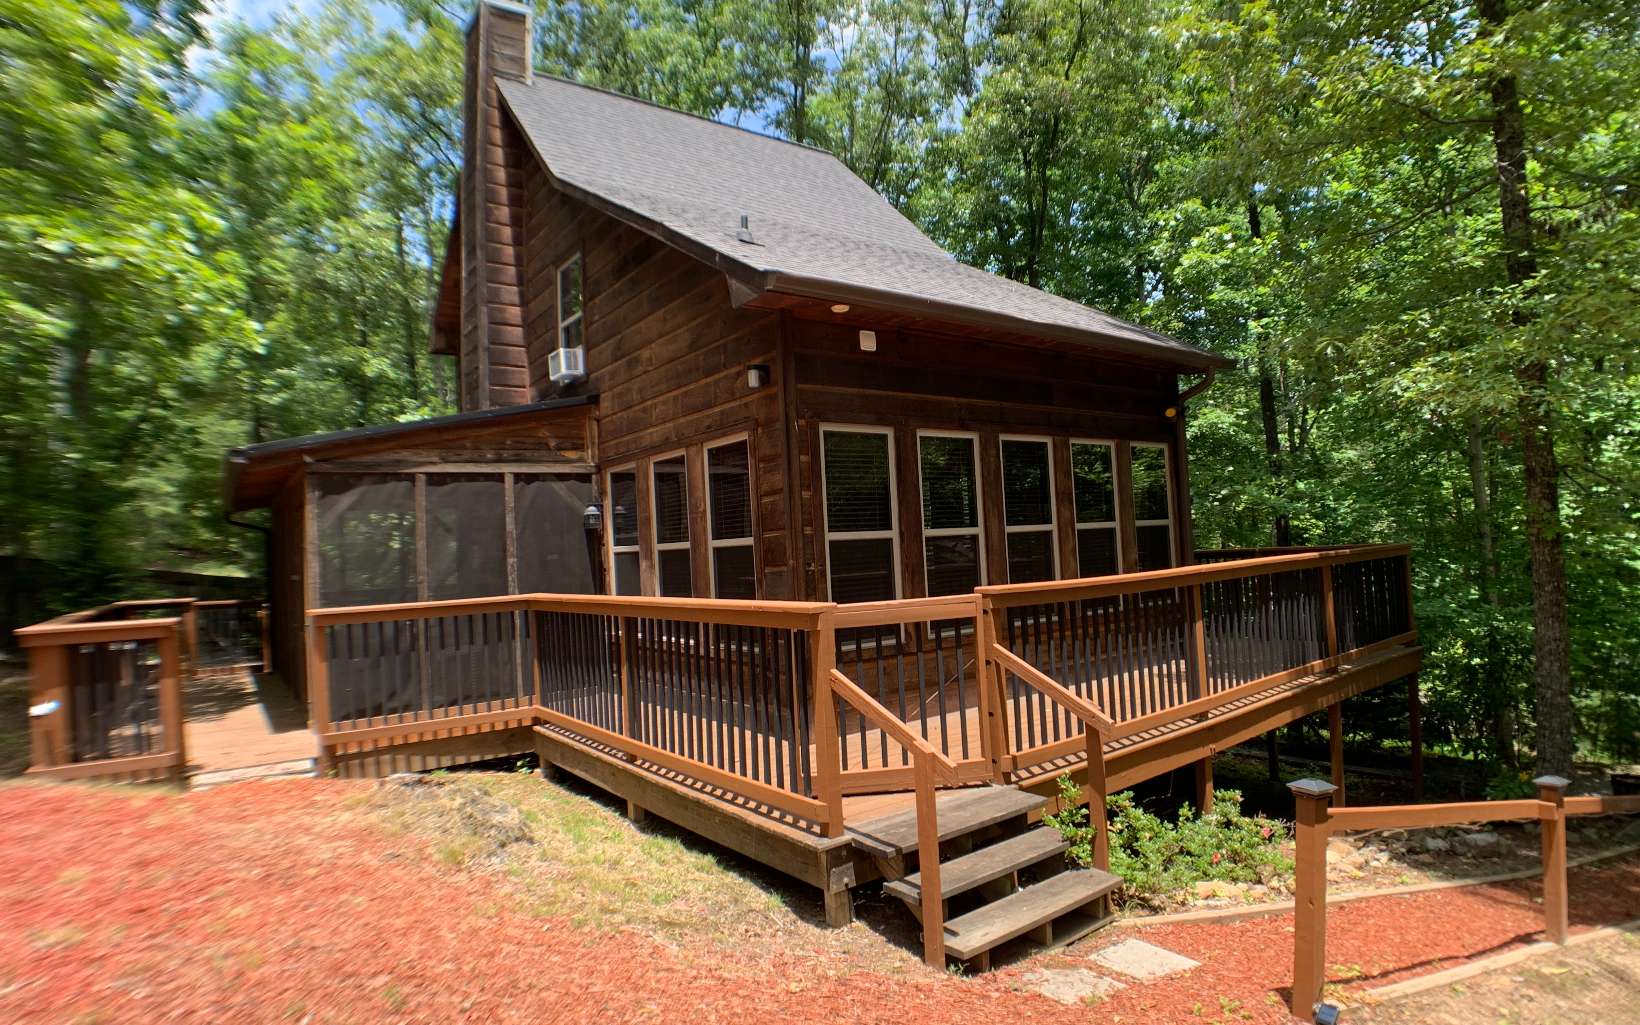 CHARMING MODERN RUSTIC CABIN on 3.1 acres, unrestricted. Great location with plenty of privacy. Custom built in 2012, updated with new paint & furnishings available on a separate Bill of Sale. Large 24x16 out building for storage/workshop or bunkhouse/game room. Wrap around deck, screened in porch, Master BR Balcony, extra sleeping area could be 3rd bedroom, outdoor fire pit area. Close to Lake Nottely & conveniently located to Blairsville, Blue Ridge & Murphy, NC.